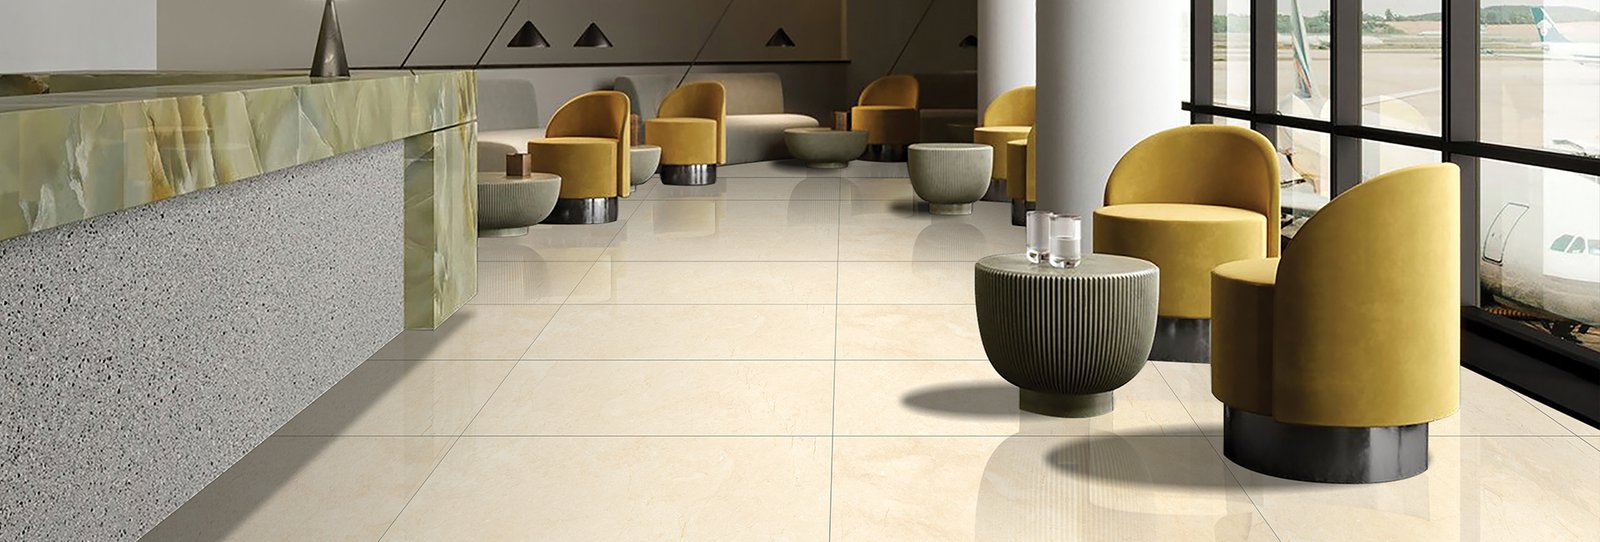 Top Tiles Company in Thailand